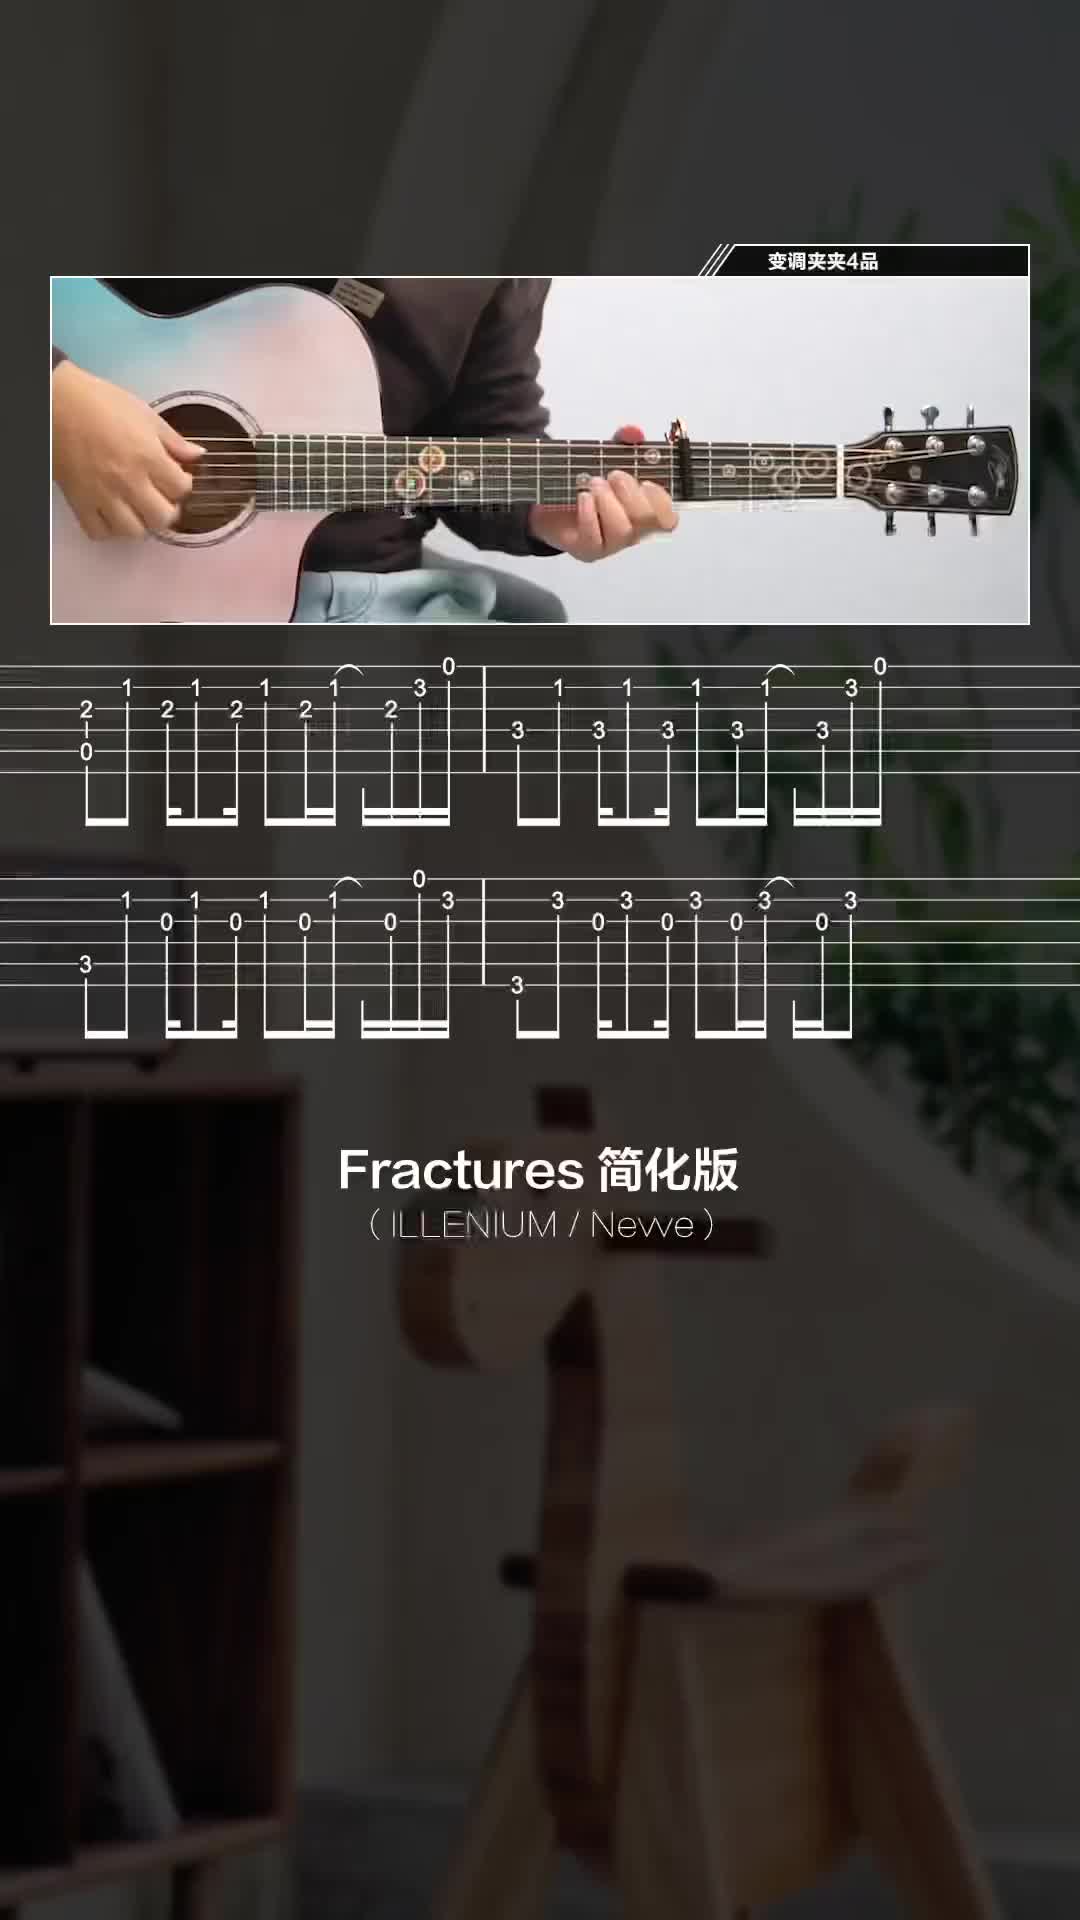 fractures吉他教学图片